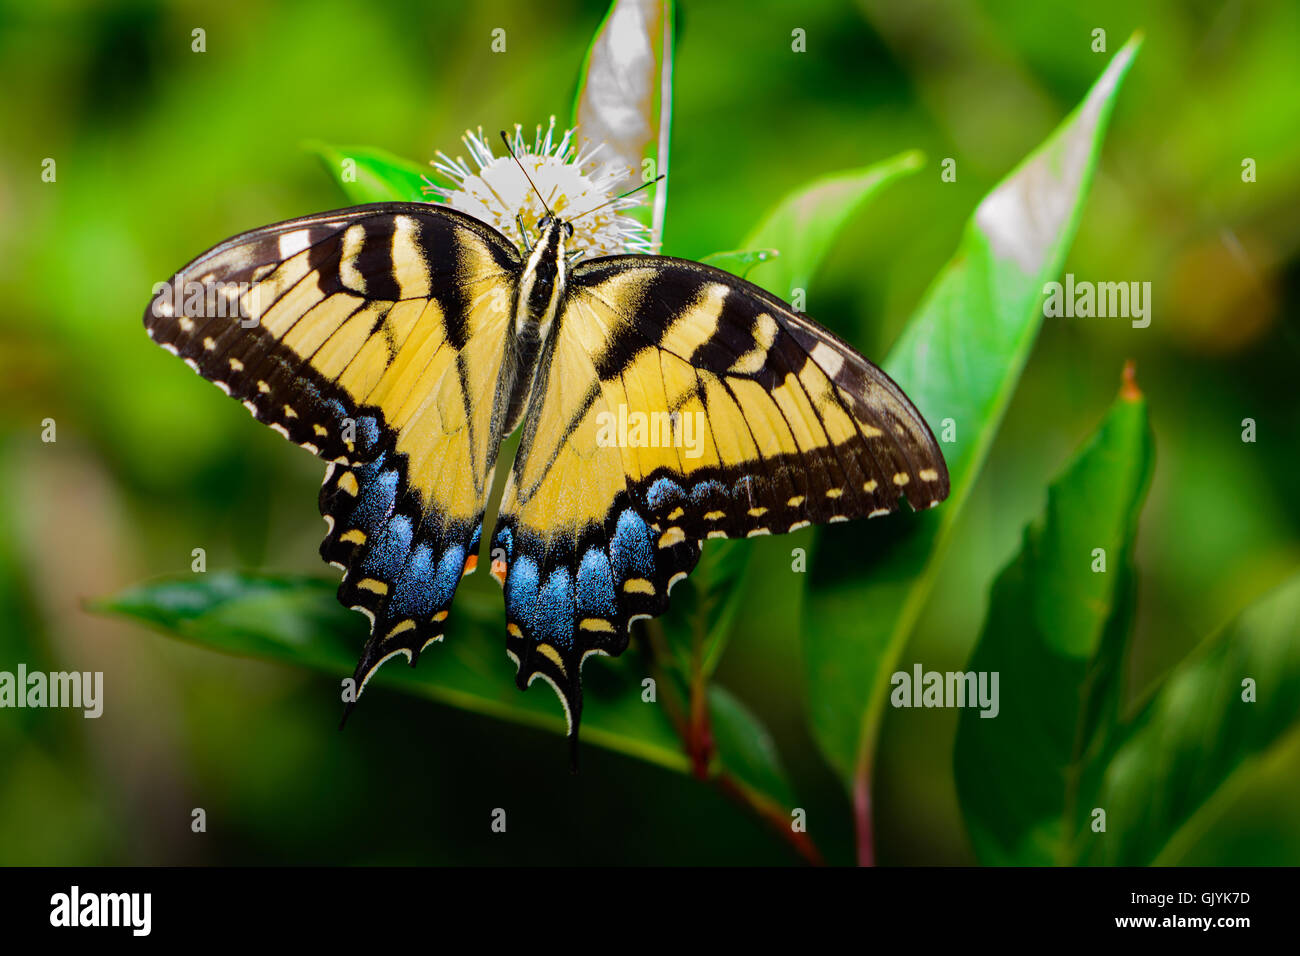 Eastern tiger swallowtail (Papilio glaucus) butterfly with vivid blue yellow and black. Fully open wings. Top View Stock Photo